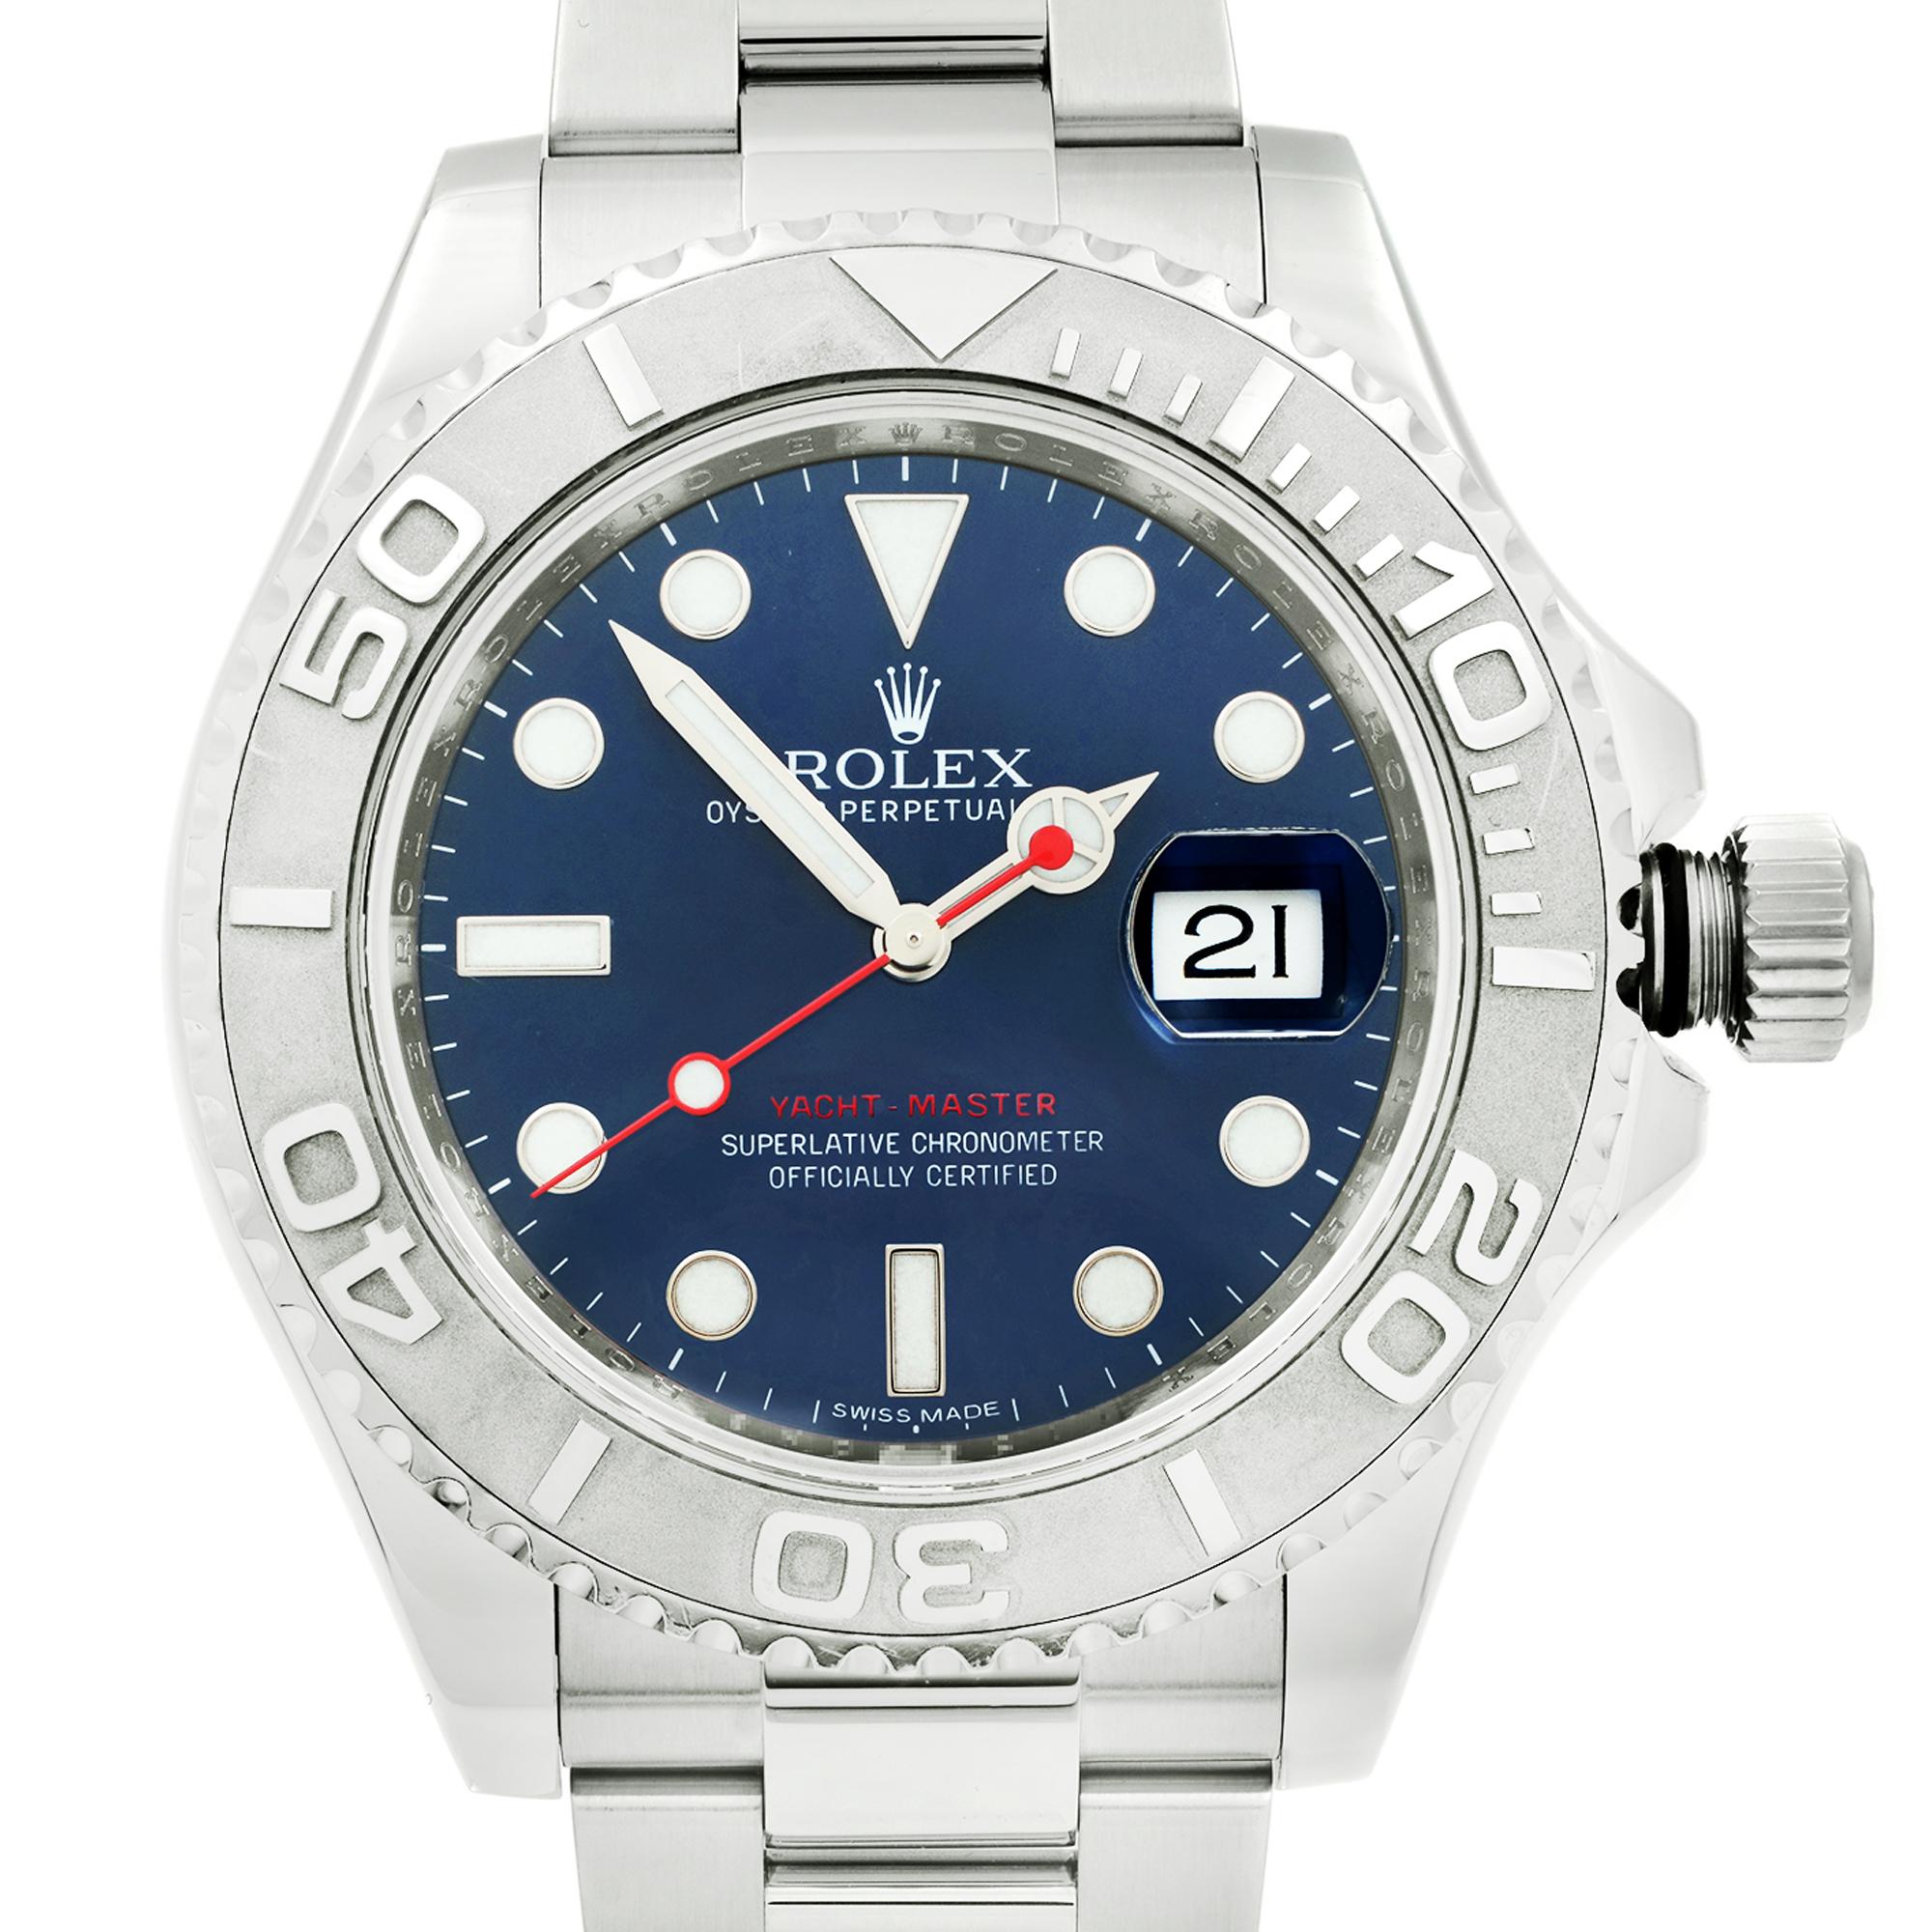 This watch is preowned with some insignificant blemishes on sandblasted surfaces on bezel. Comes with manufacturers box and papers, backed by a 1 year warranty provided by Chronostore.
Details:
Brand Rolex
Department Men
Model Number 116622
Model